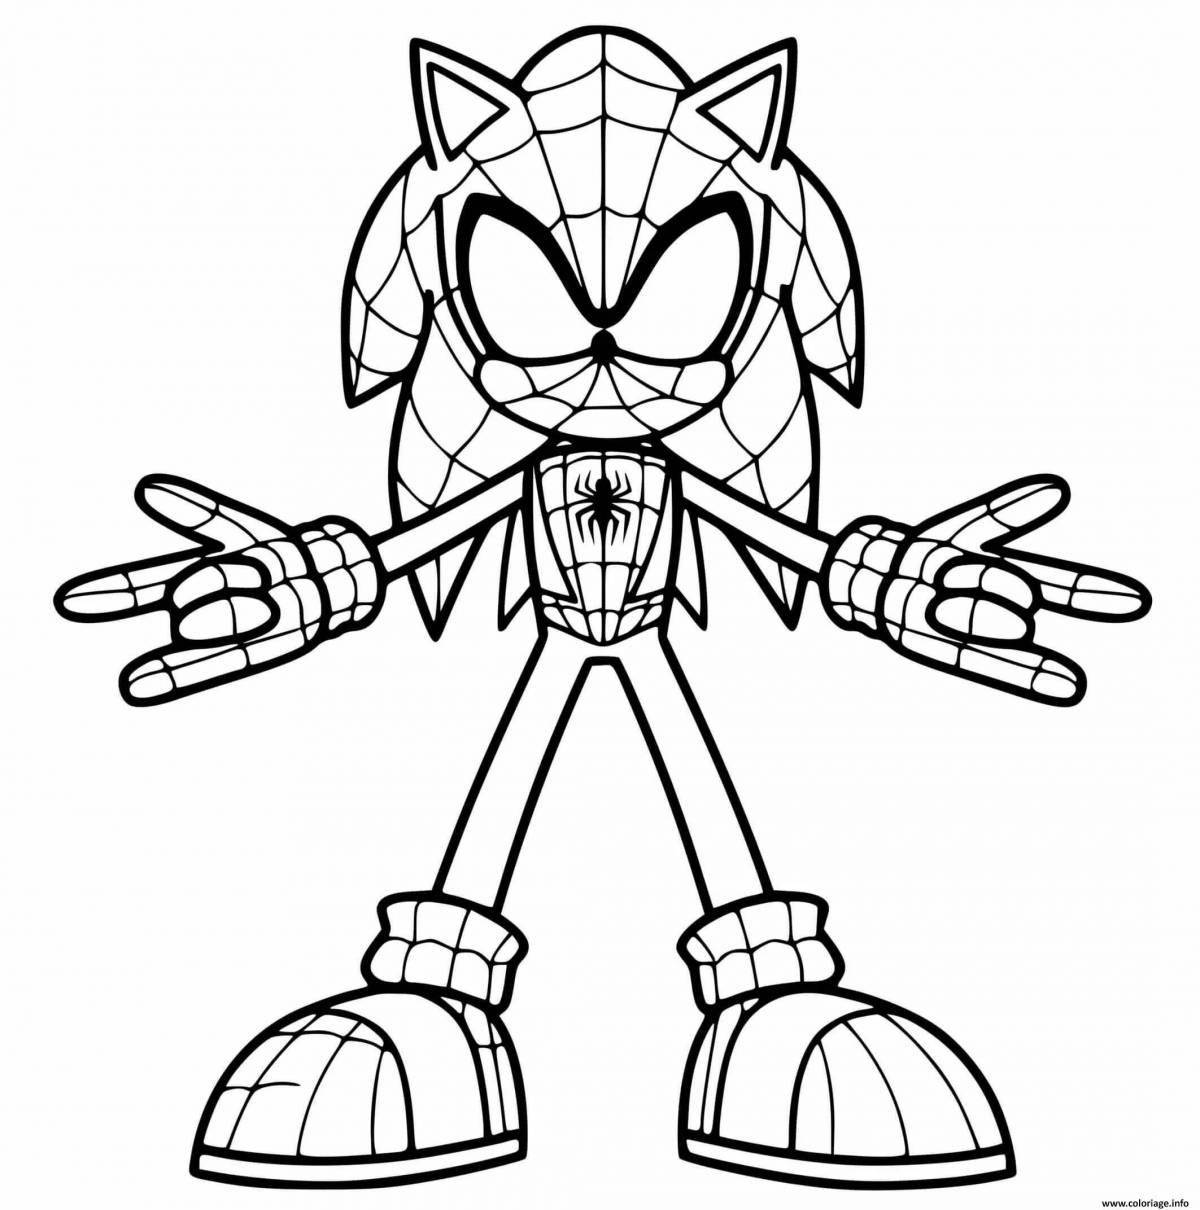 Majestic excalibur sonic coloring page